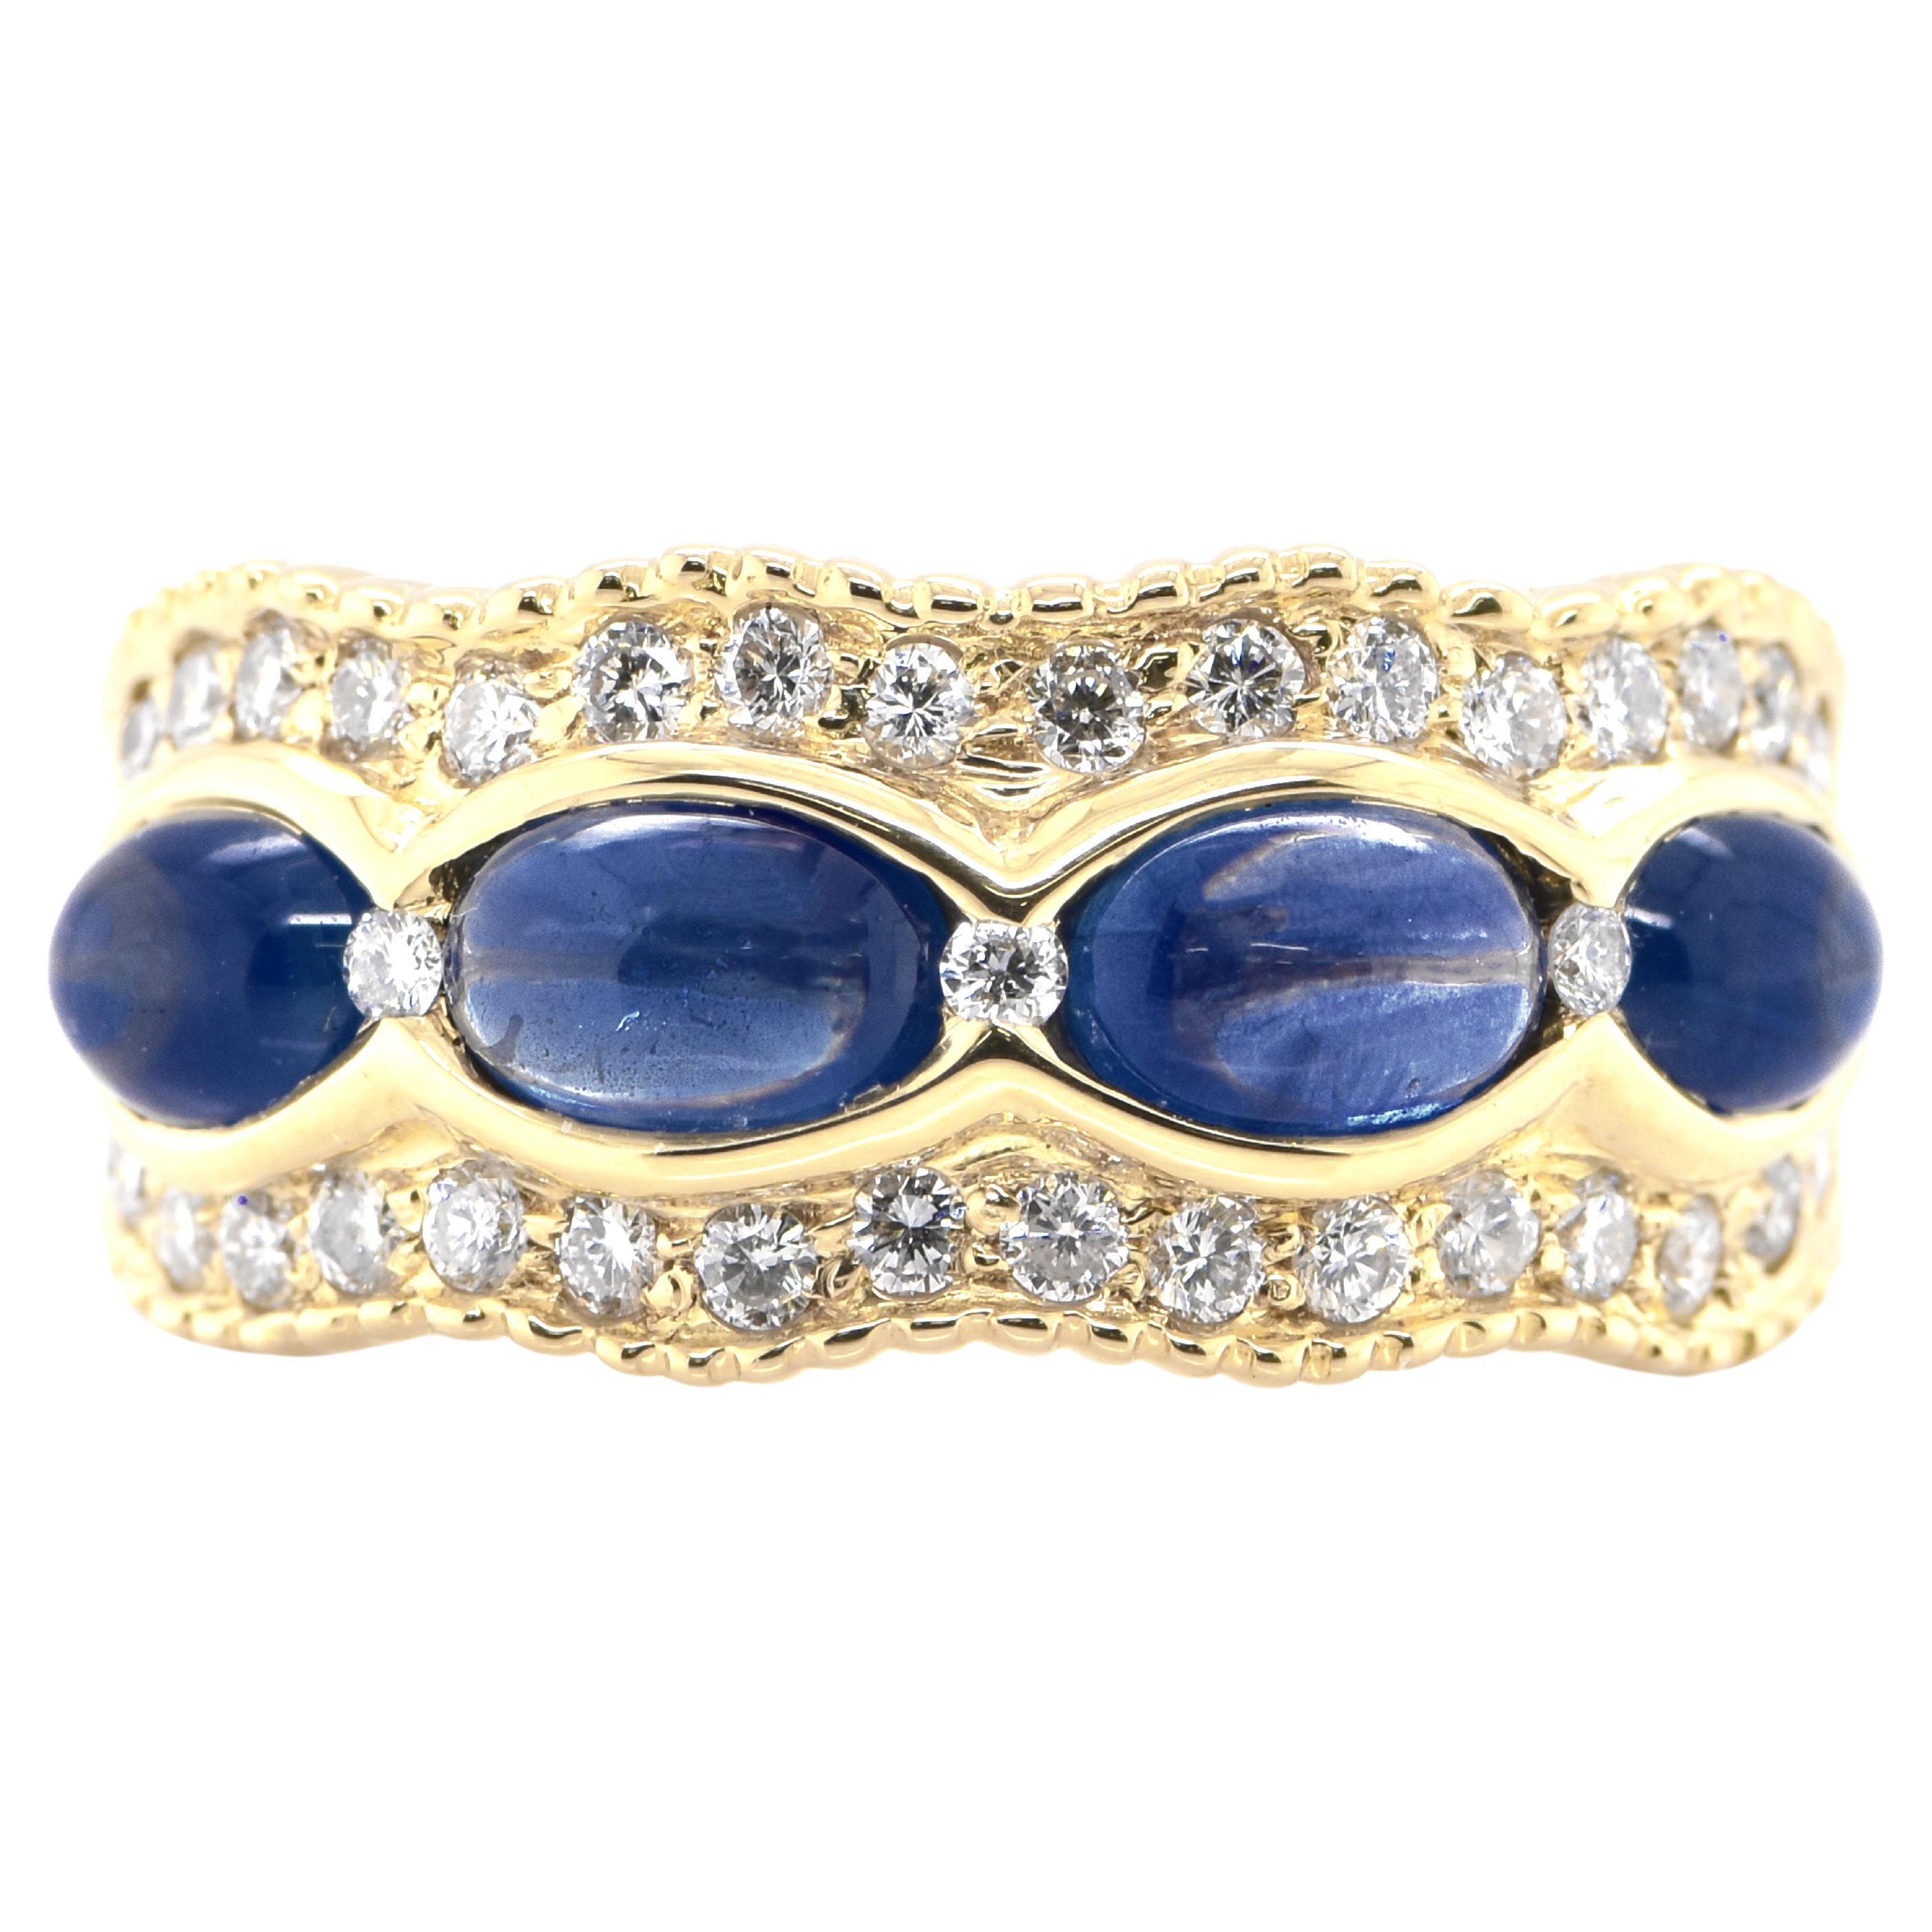 2.95 Carat Natural Cabochon Sapphires and Diamond Half Eternity Band Ring For Sale